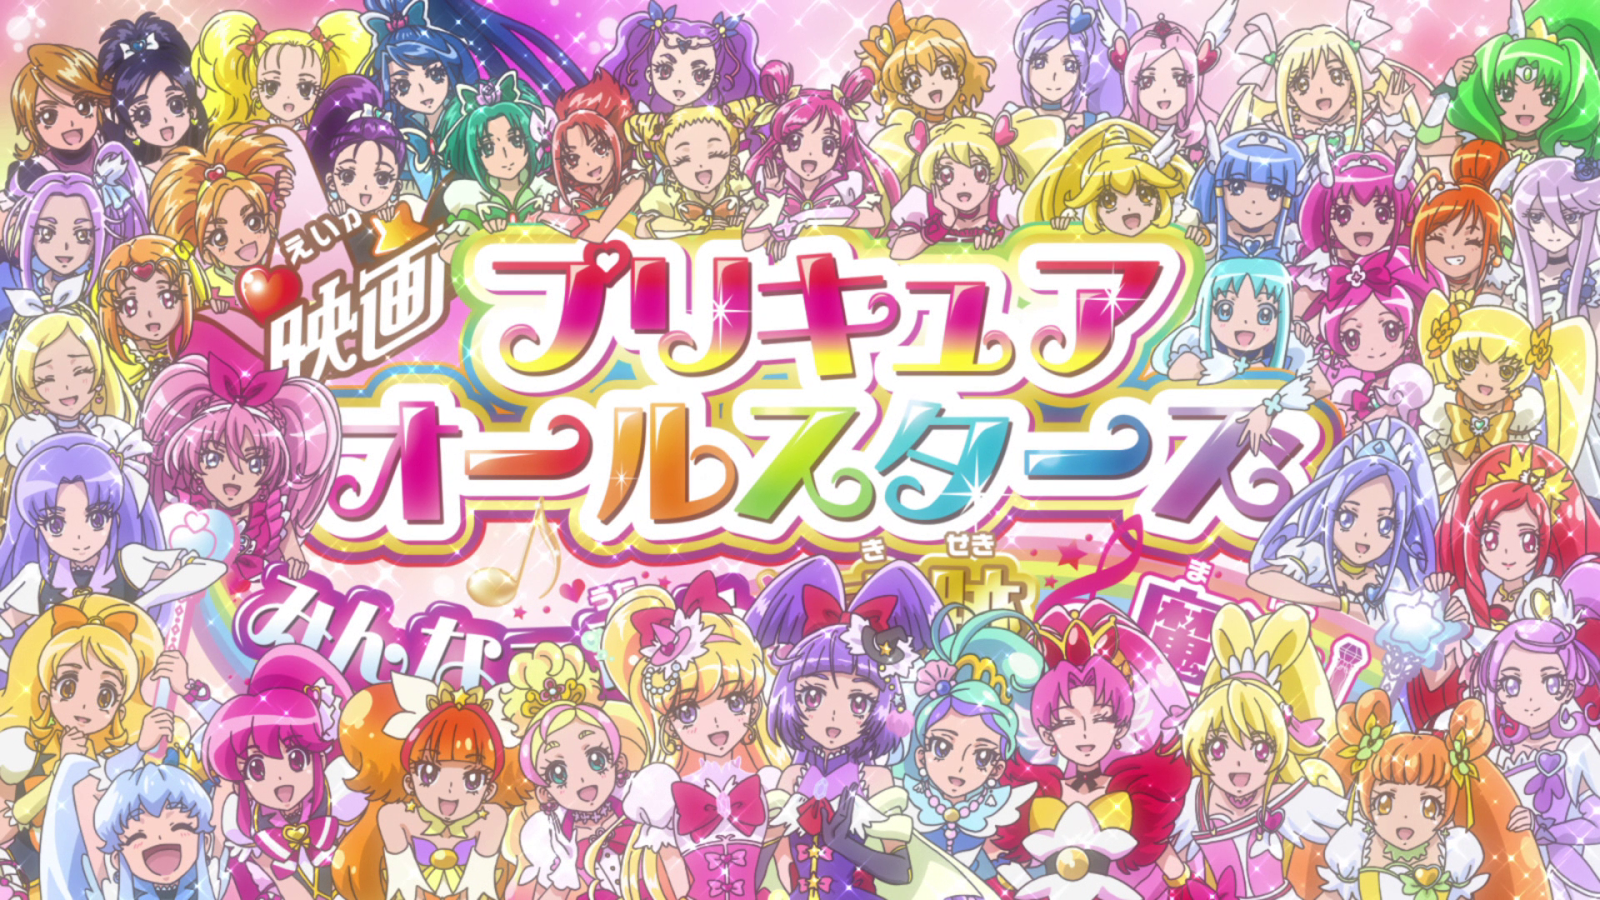 Hall of Anime Fame: Pretty Cure All Stars: Singing with Everyone♪ Miraculous Magic! Movie Review